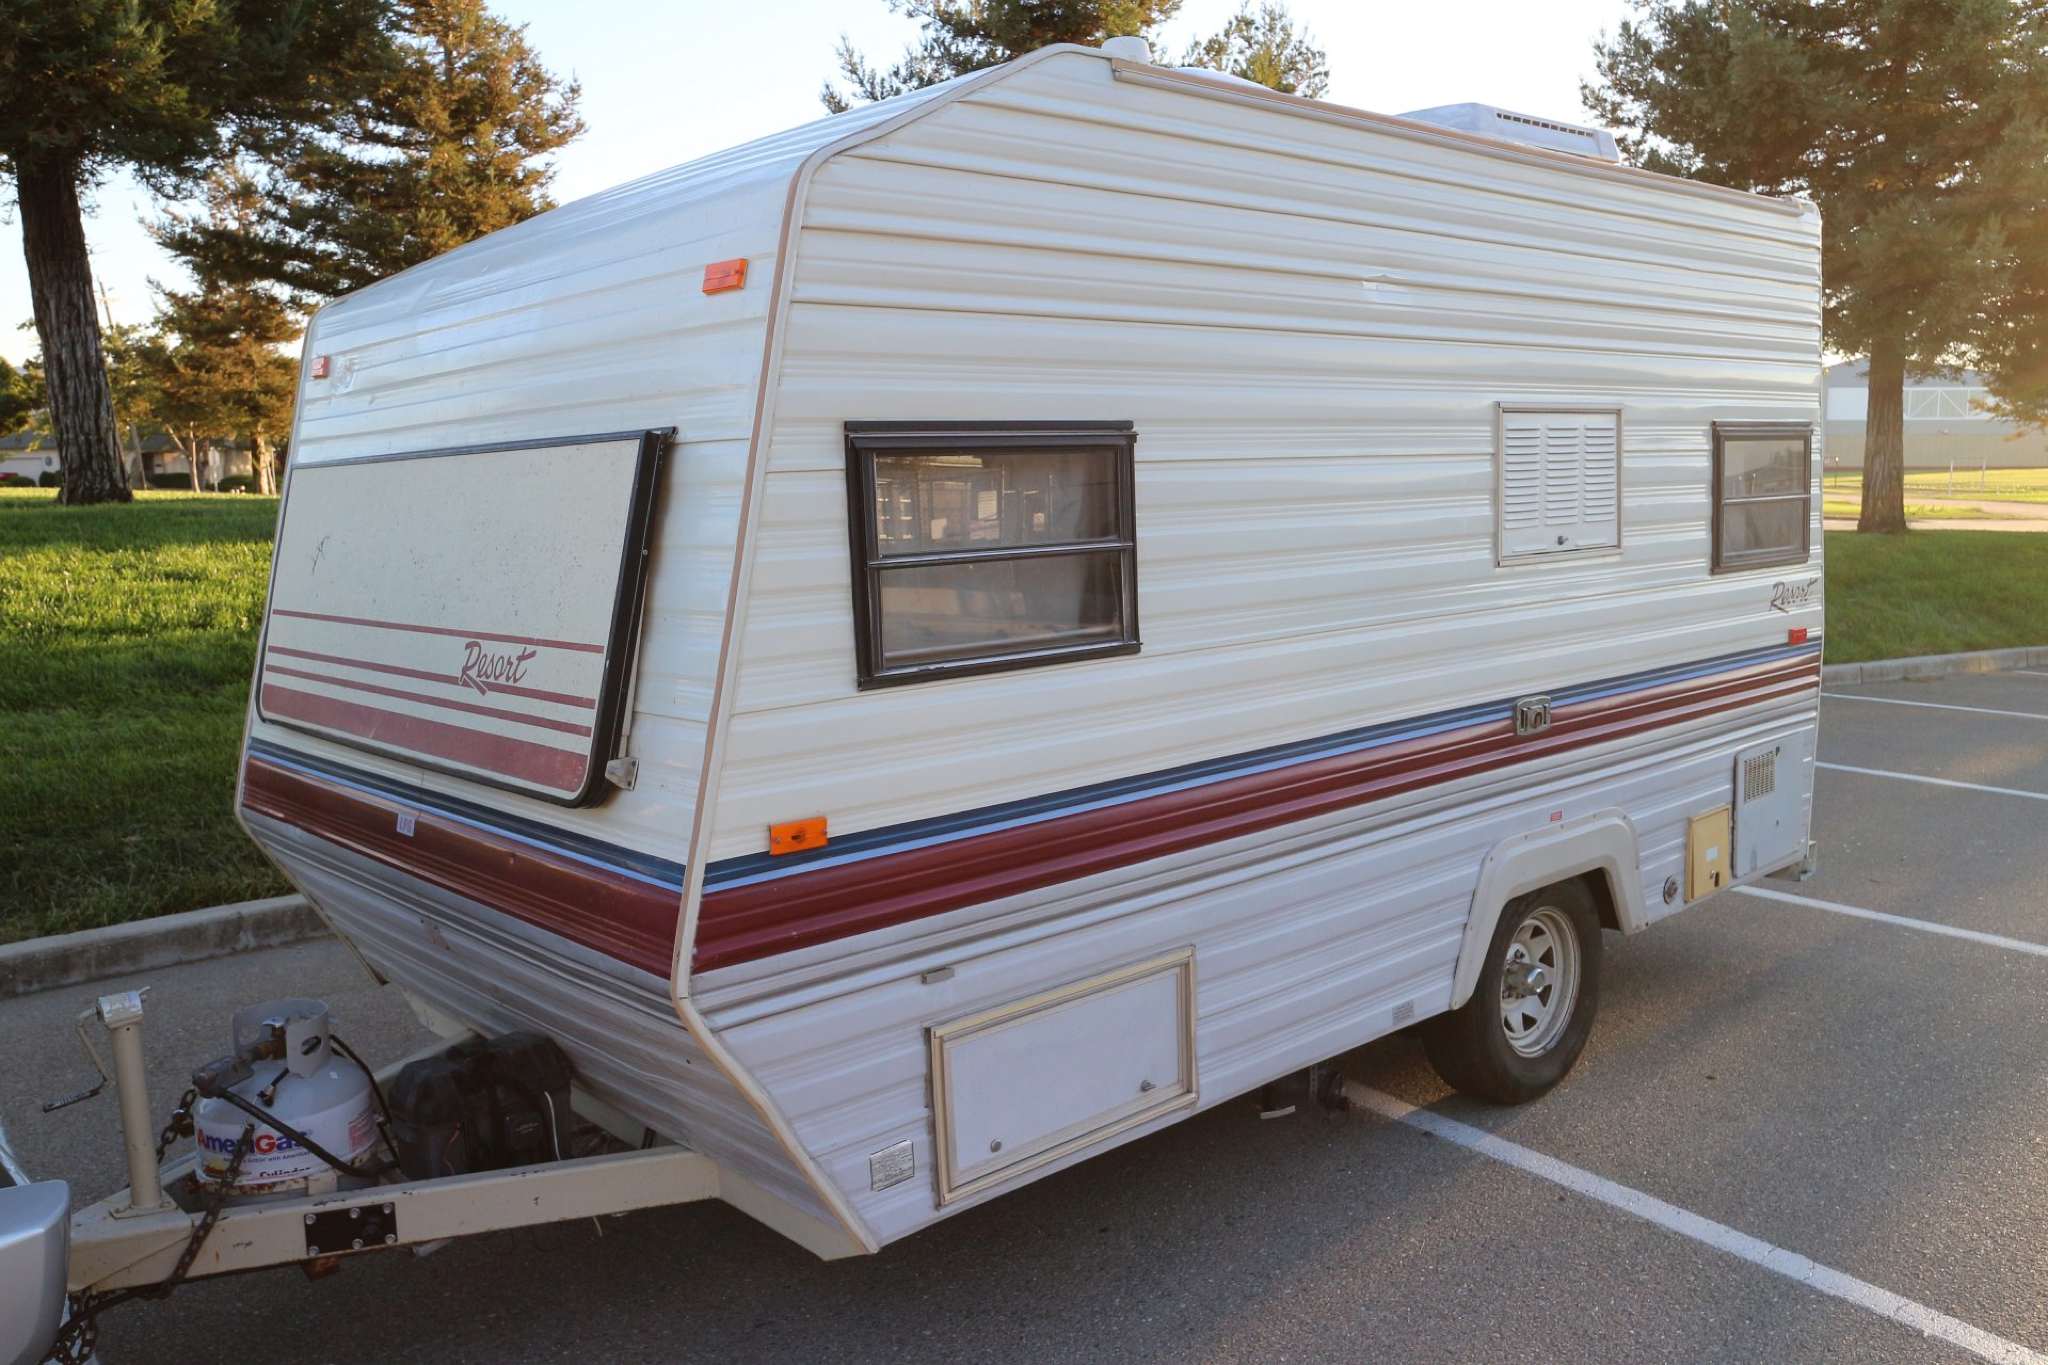 terry travel trailers for sale